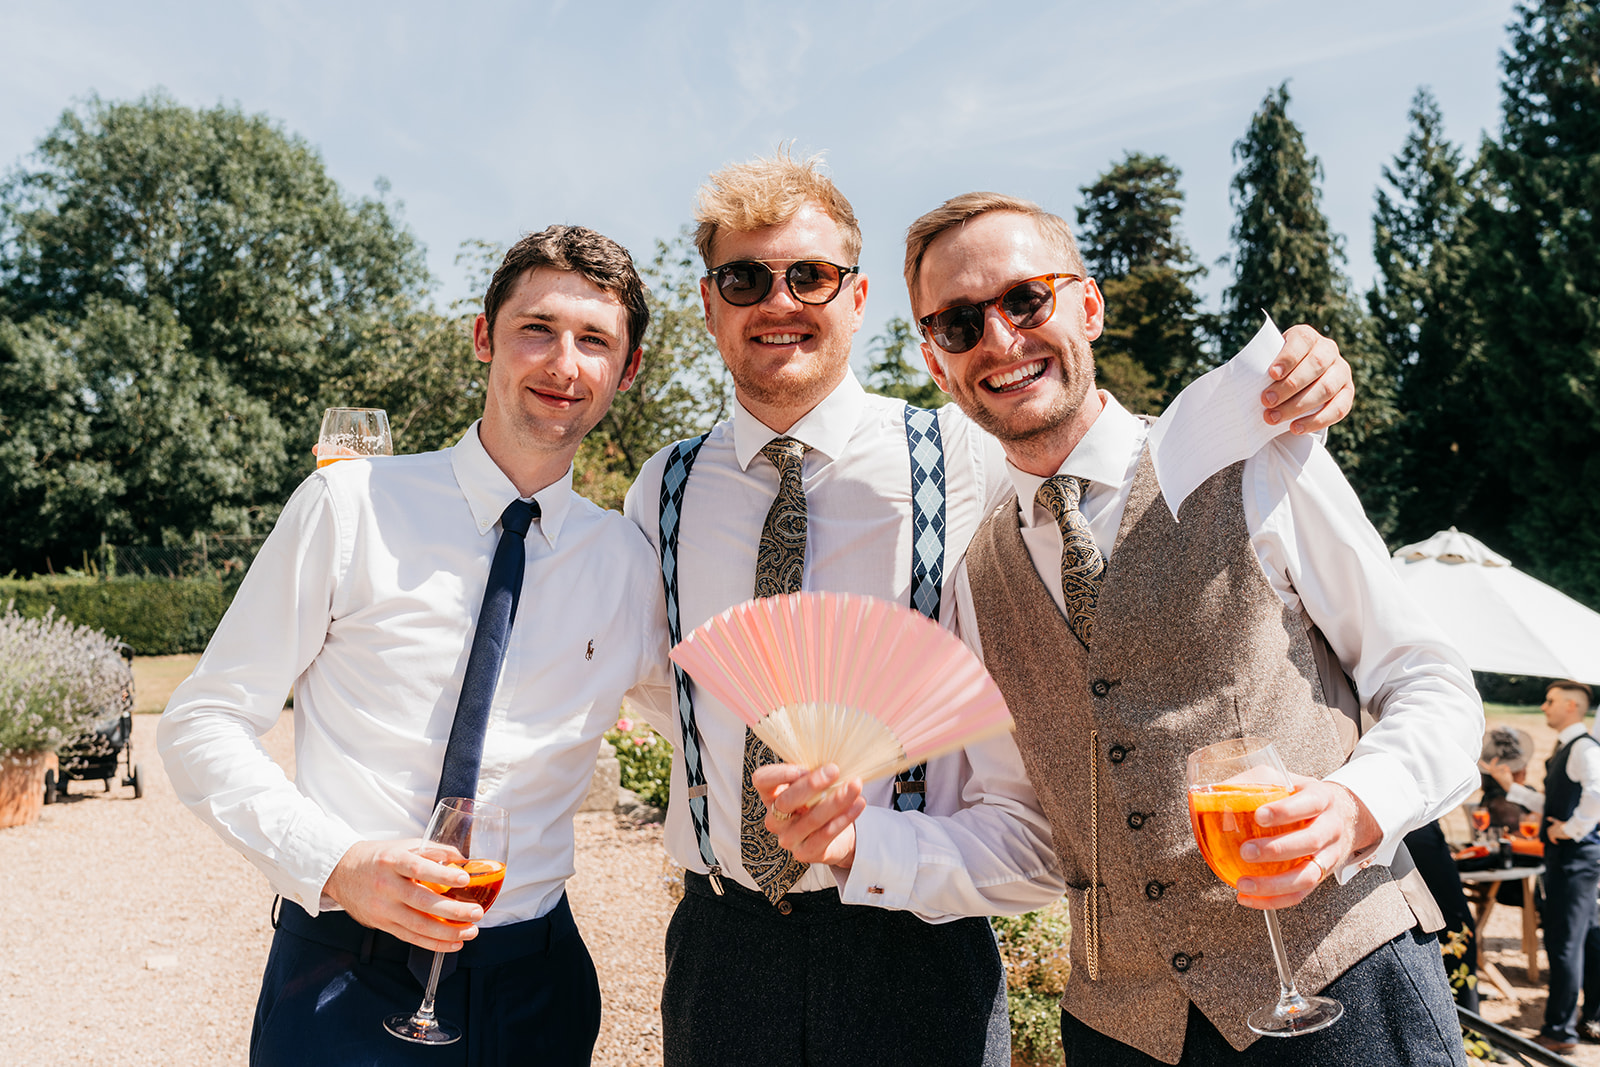 The groom with his friends during the drinks reception